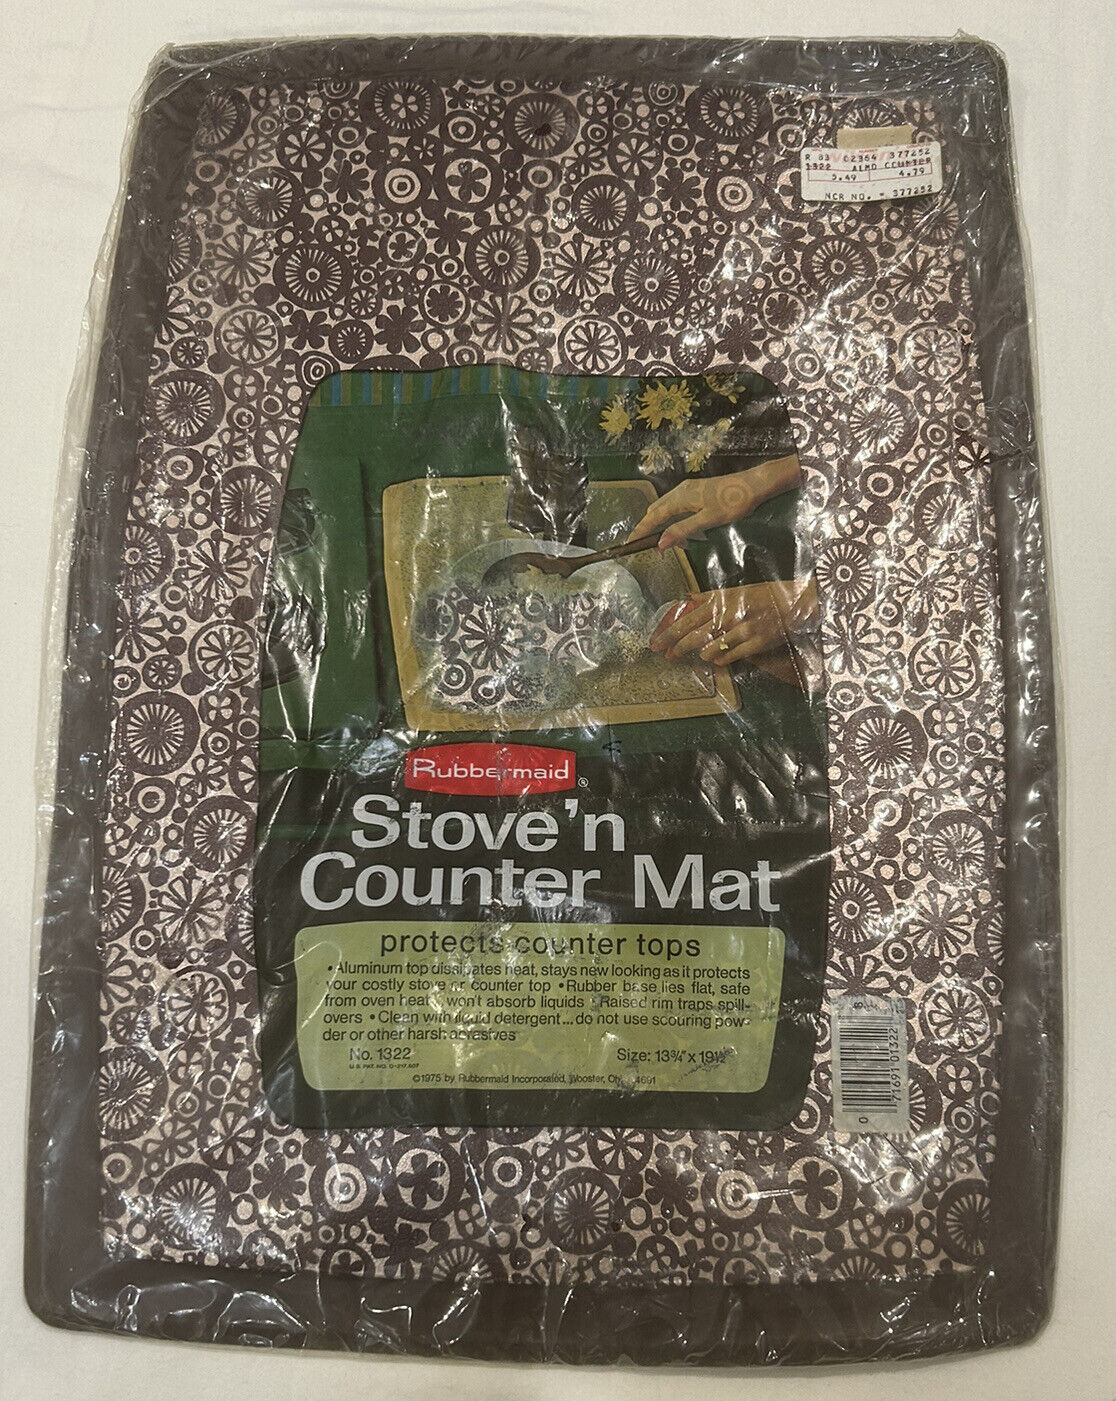 NOS Rubbermaid Stove ‘n Counter Mat BROWN 13 3/4” x 19 1/2” Made in USA 1975